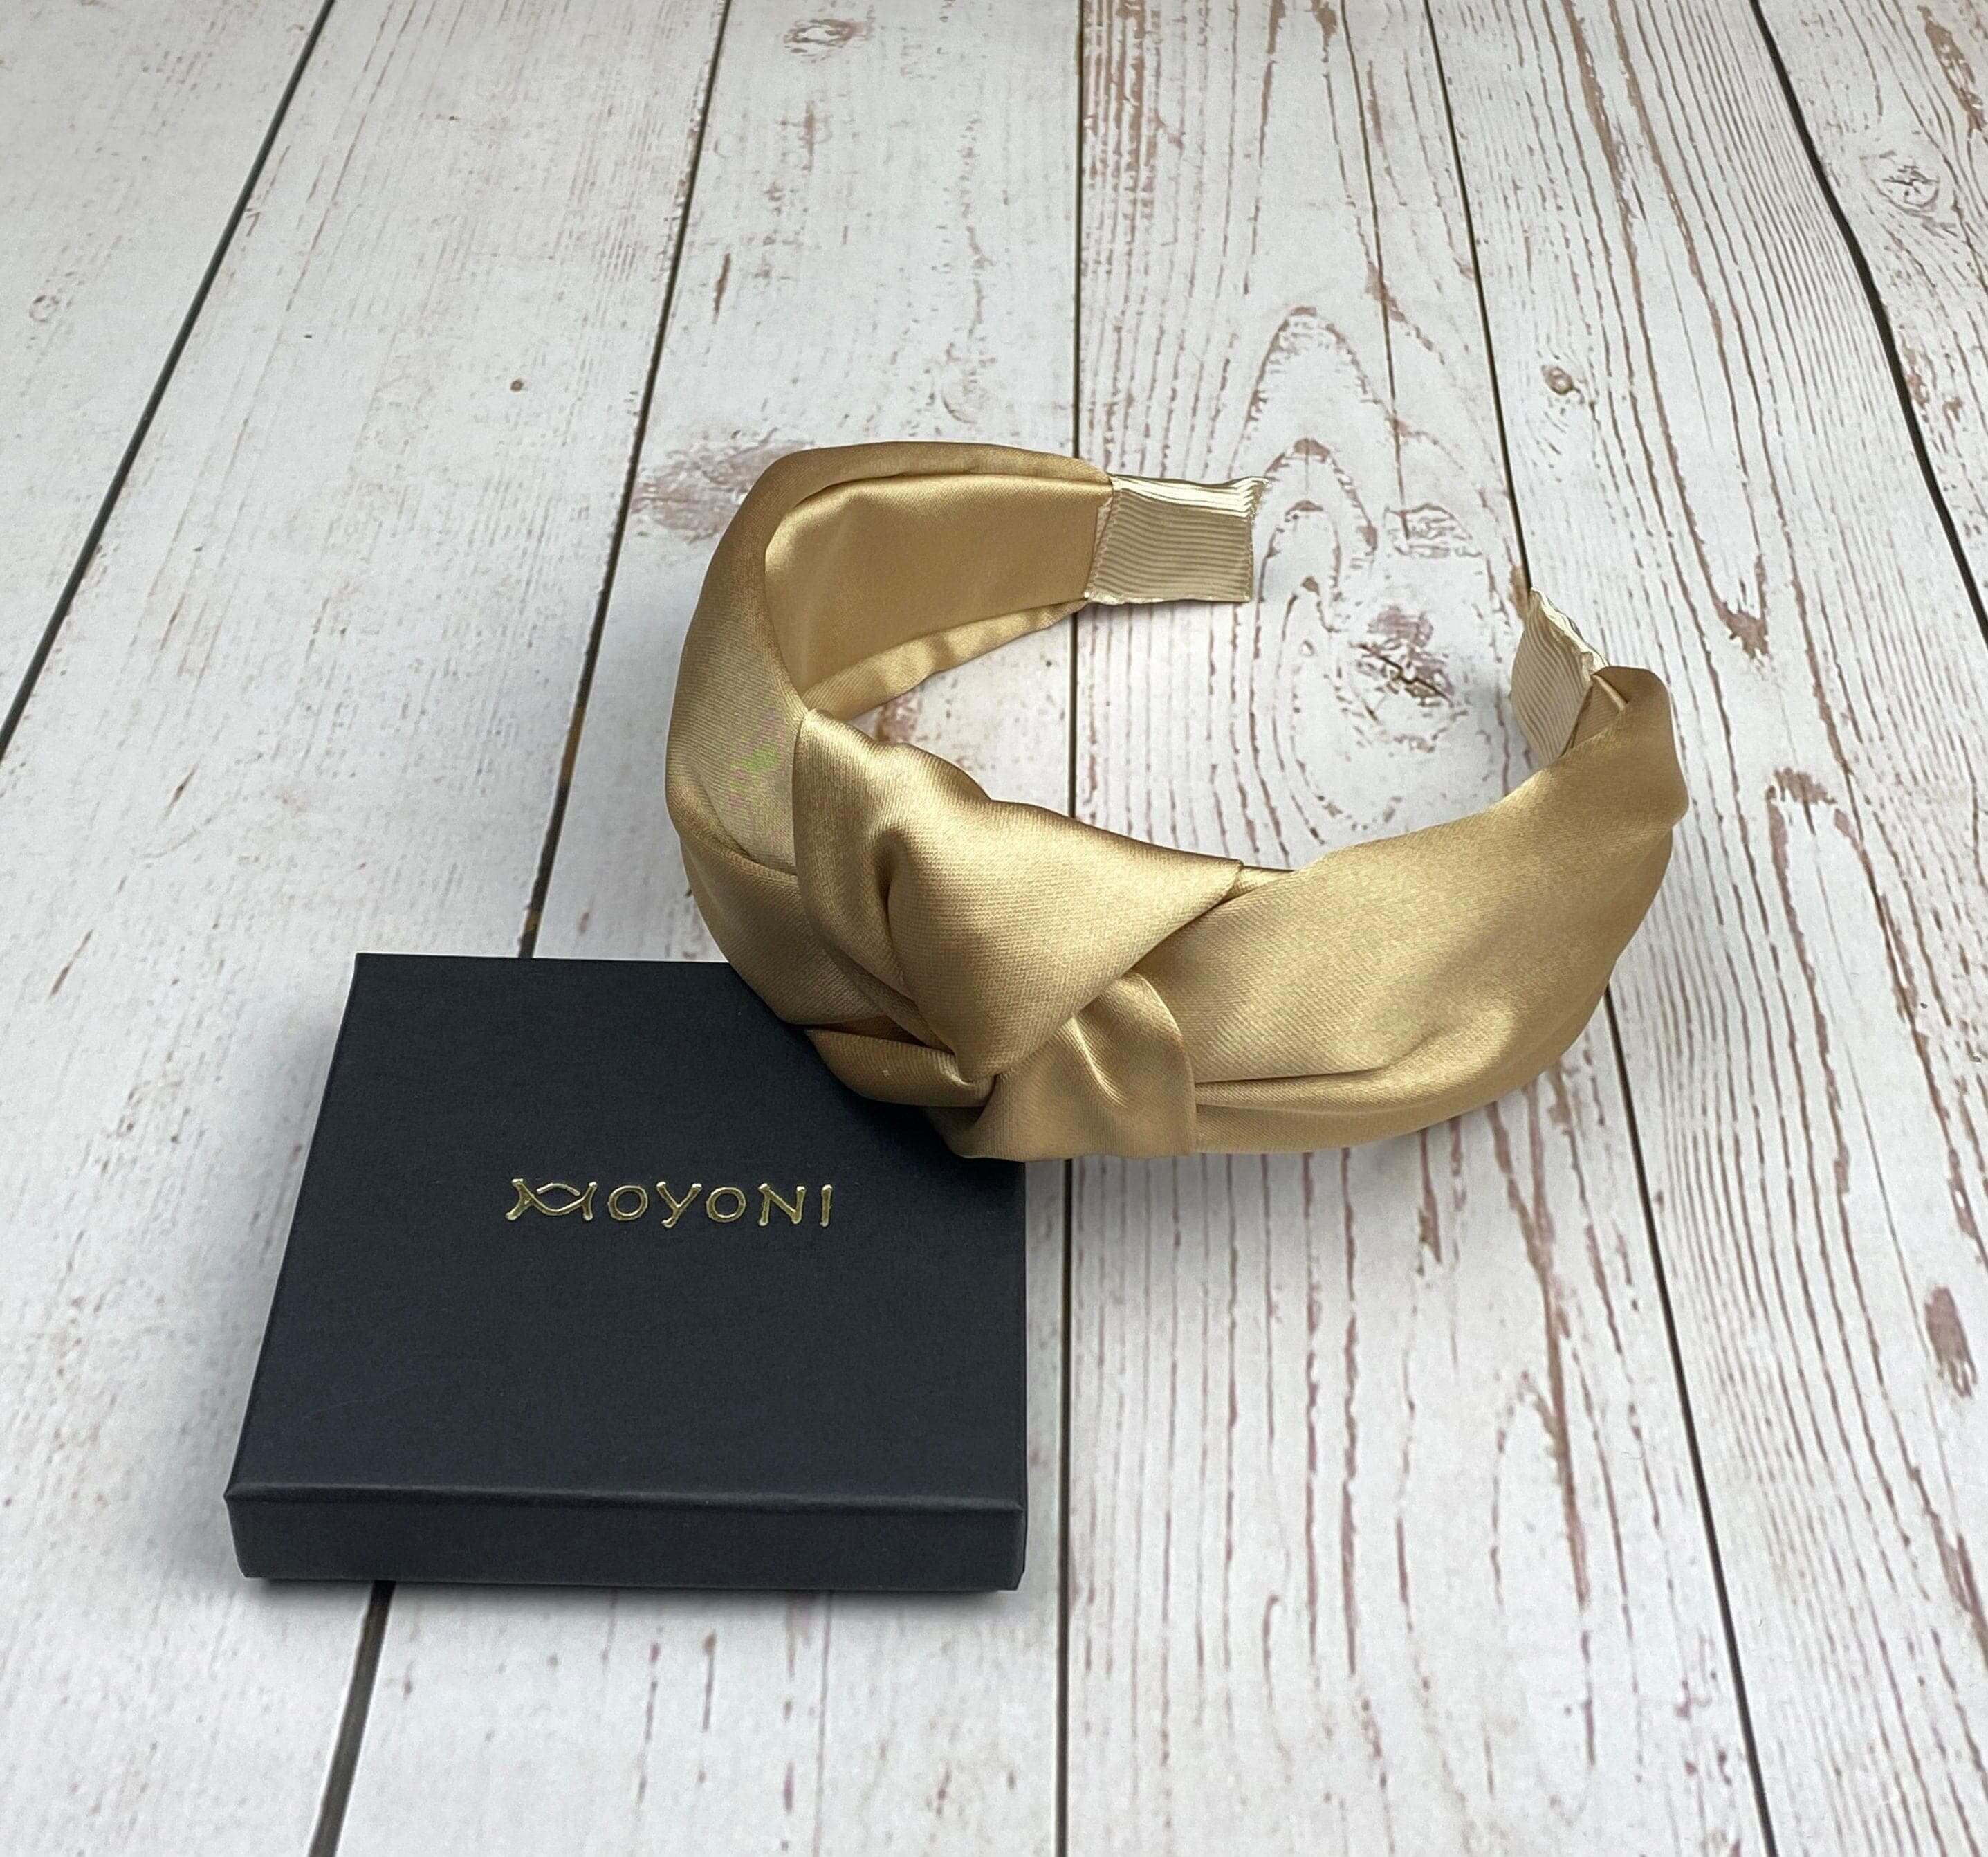 Stylish Chic Dark Beige Satin Braided Headband without Padded - Brilliant Color Accessory for Women available at Moyoni Design